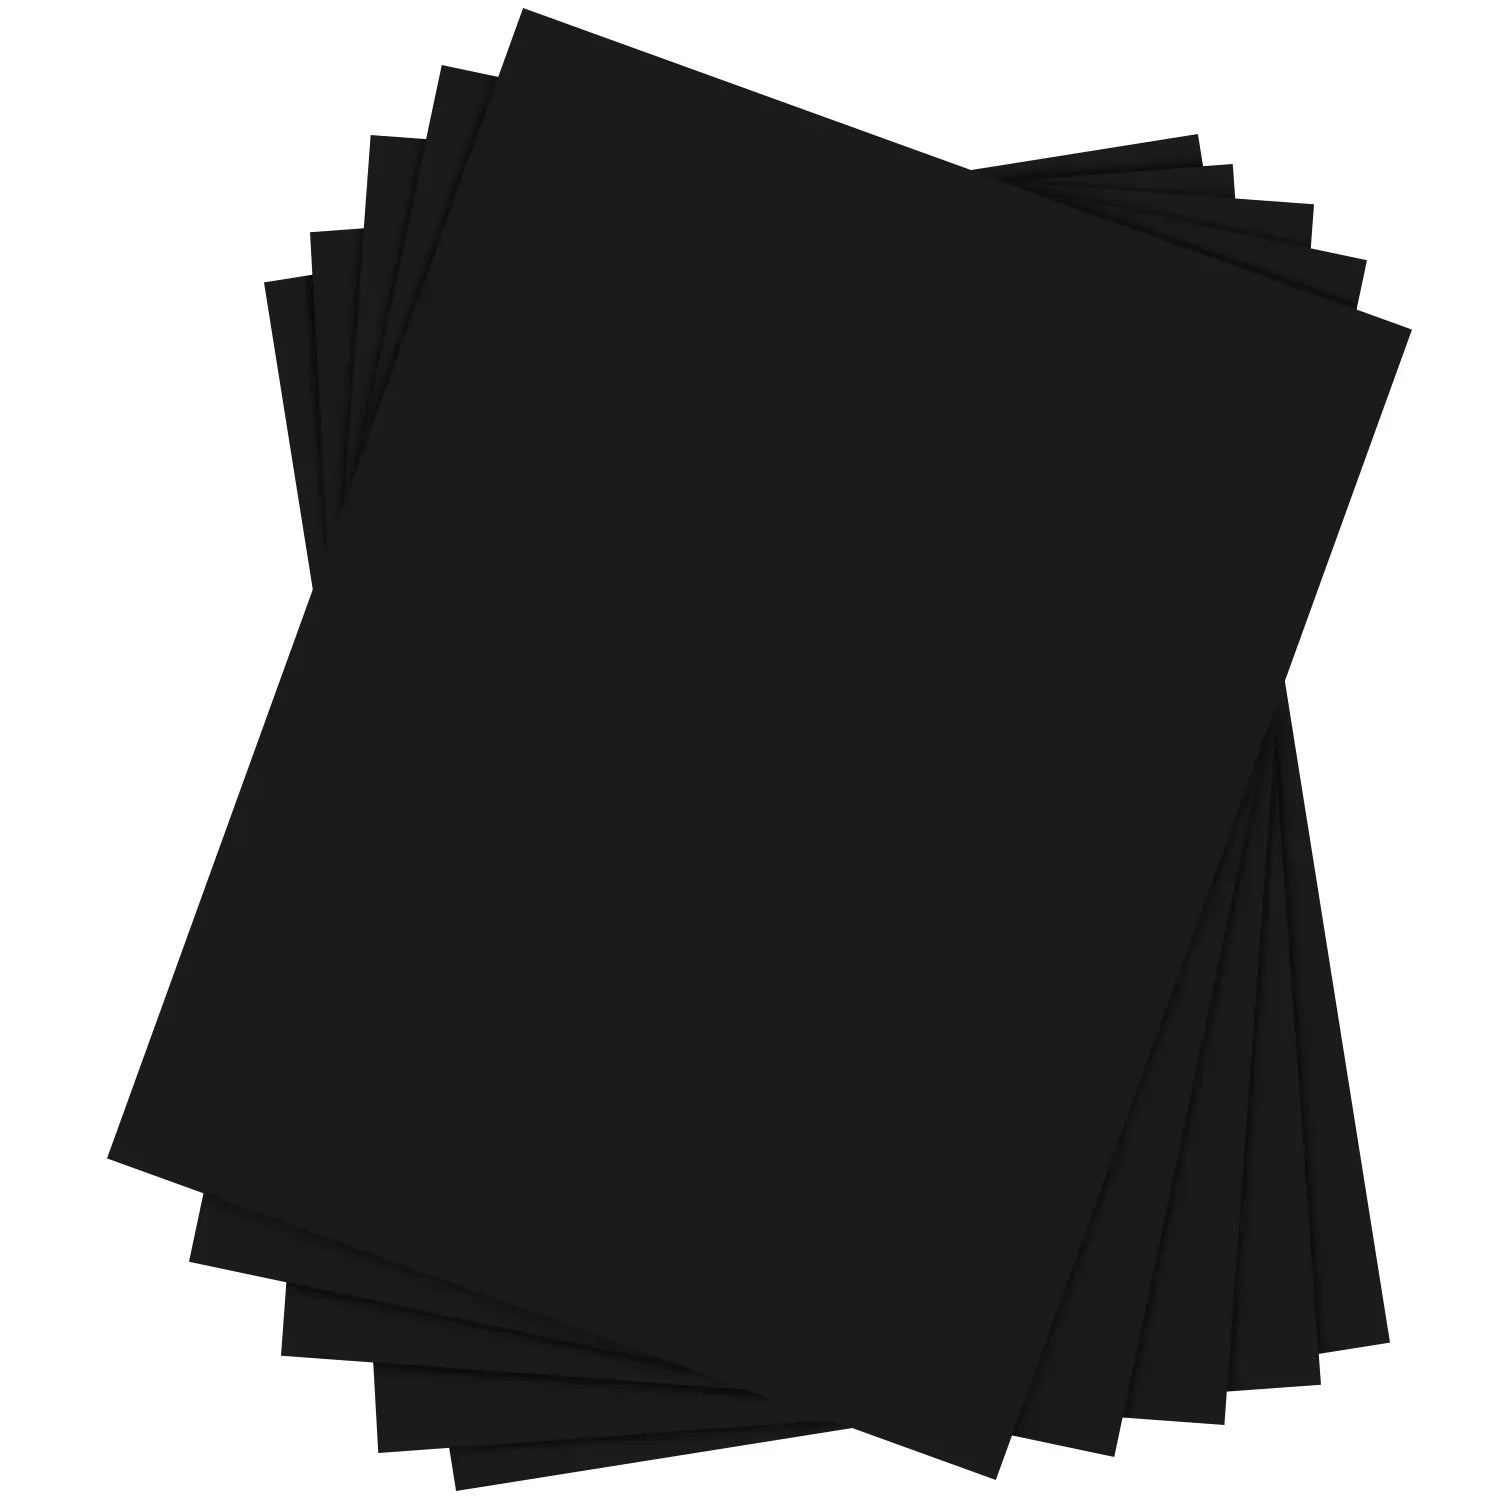 Black 12×12 Chipboard Sheets (10 pack) – Graphic 45 Papers